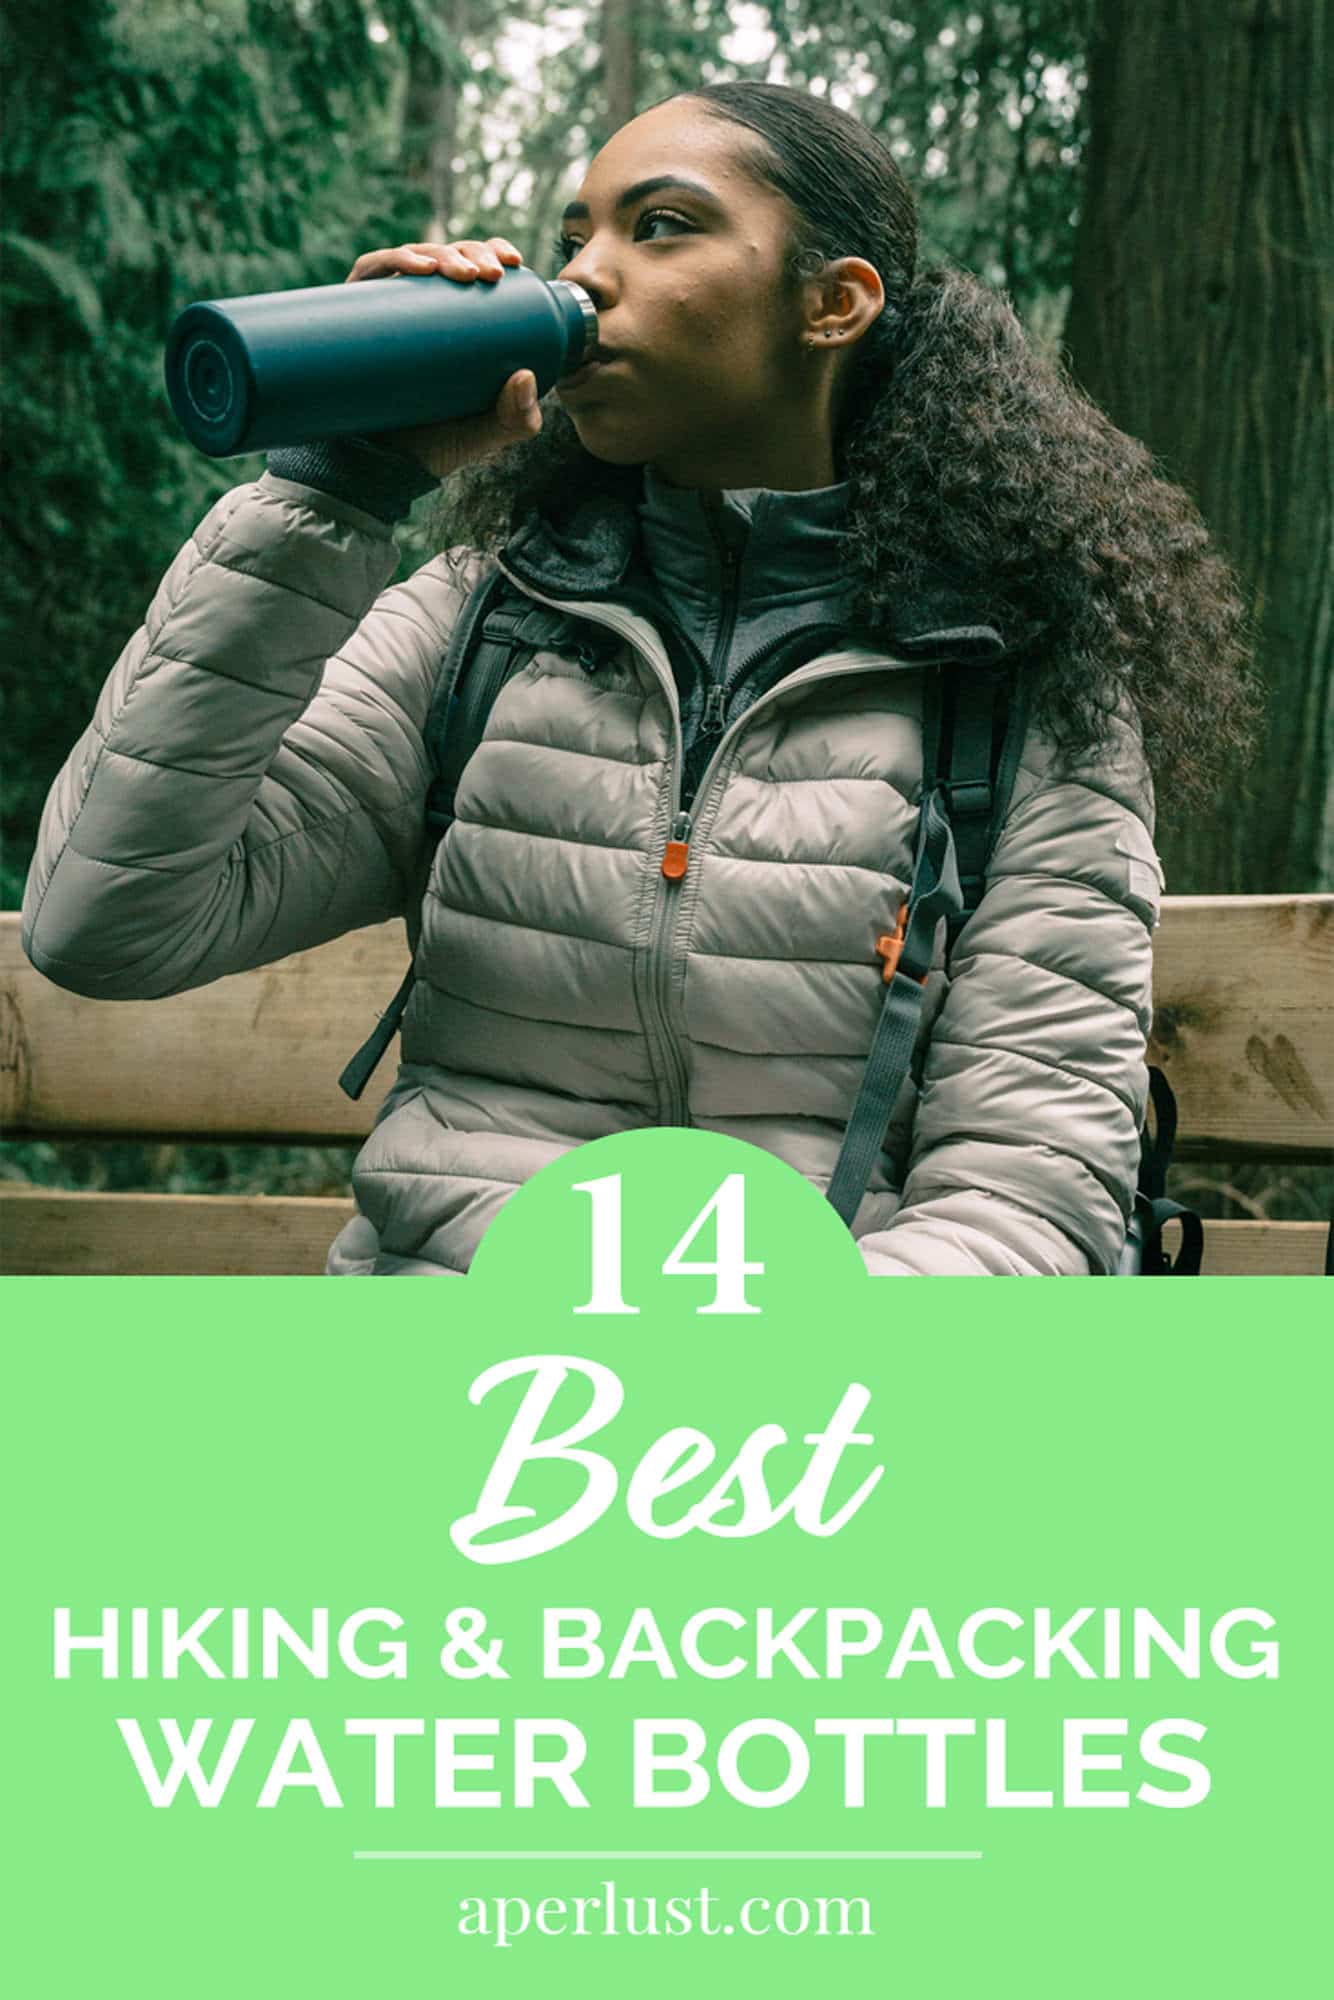 14 best hiking and backpacking water bottles Pinterest pin